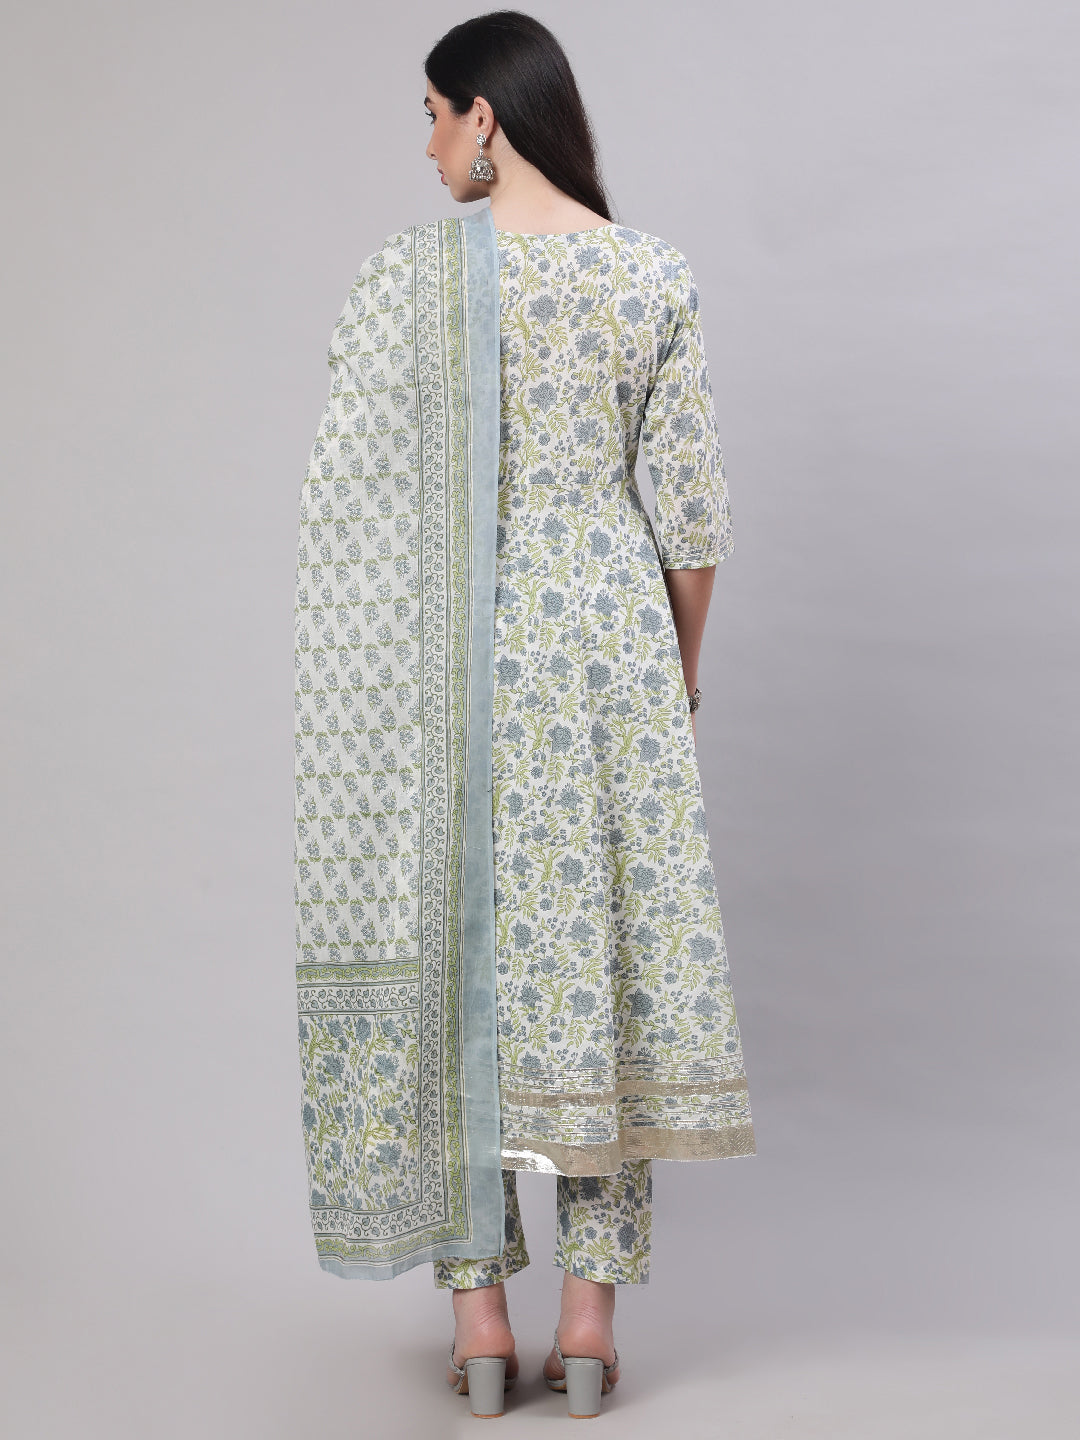 Women's Off-White Floral Printed Flared Kurta With Trouser And Dupatta - Taantav